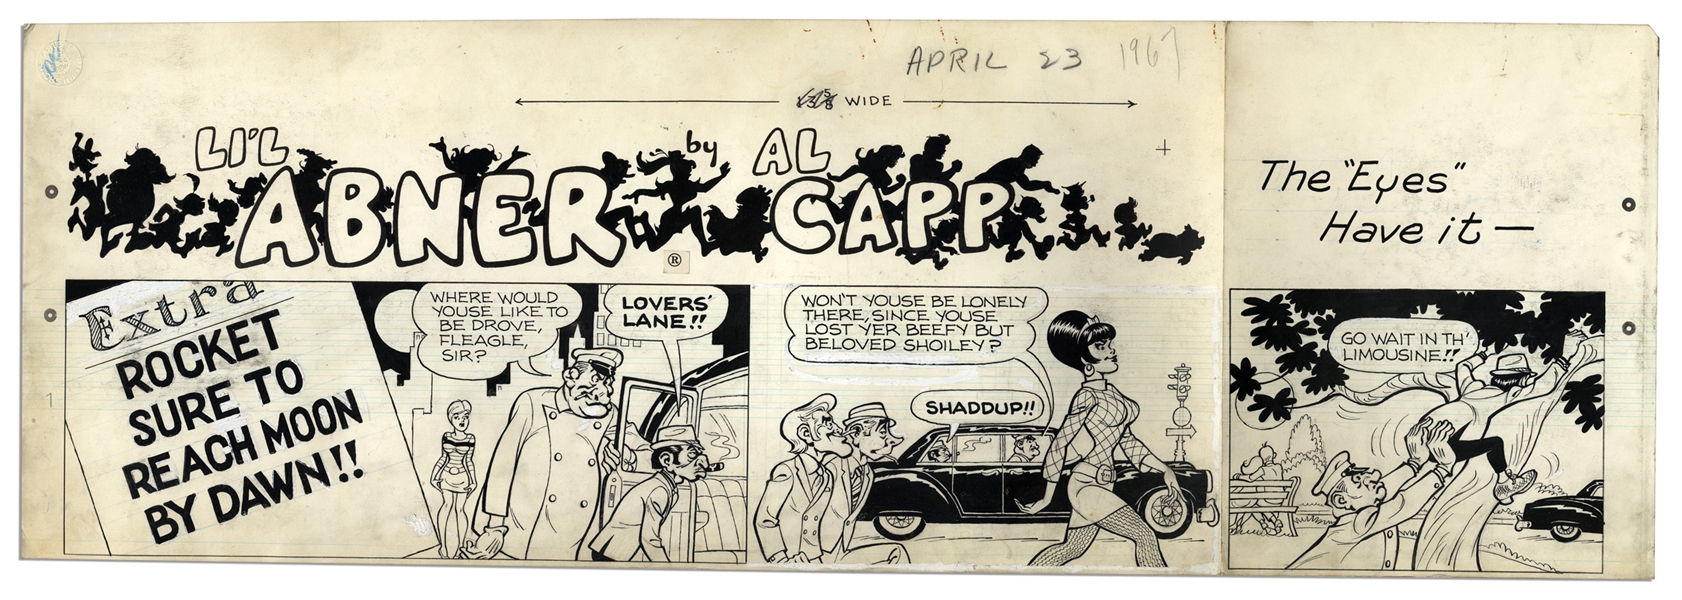 ''Li'l Abner'' Sunday Strip Hand Drawn by Al Capp From 23 April 1967 -- Featuring Evil Eye Fleegle & Shoiley -- 29'' x 15'' -- Toning & Tape, Overall Very Good -- From the Al Capp Estate